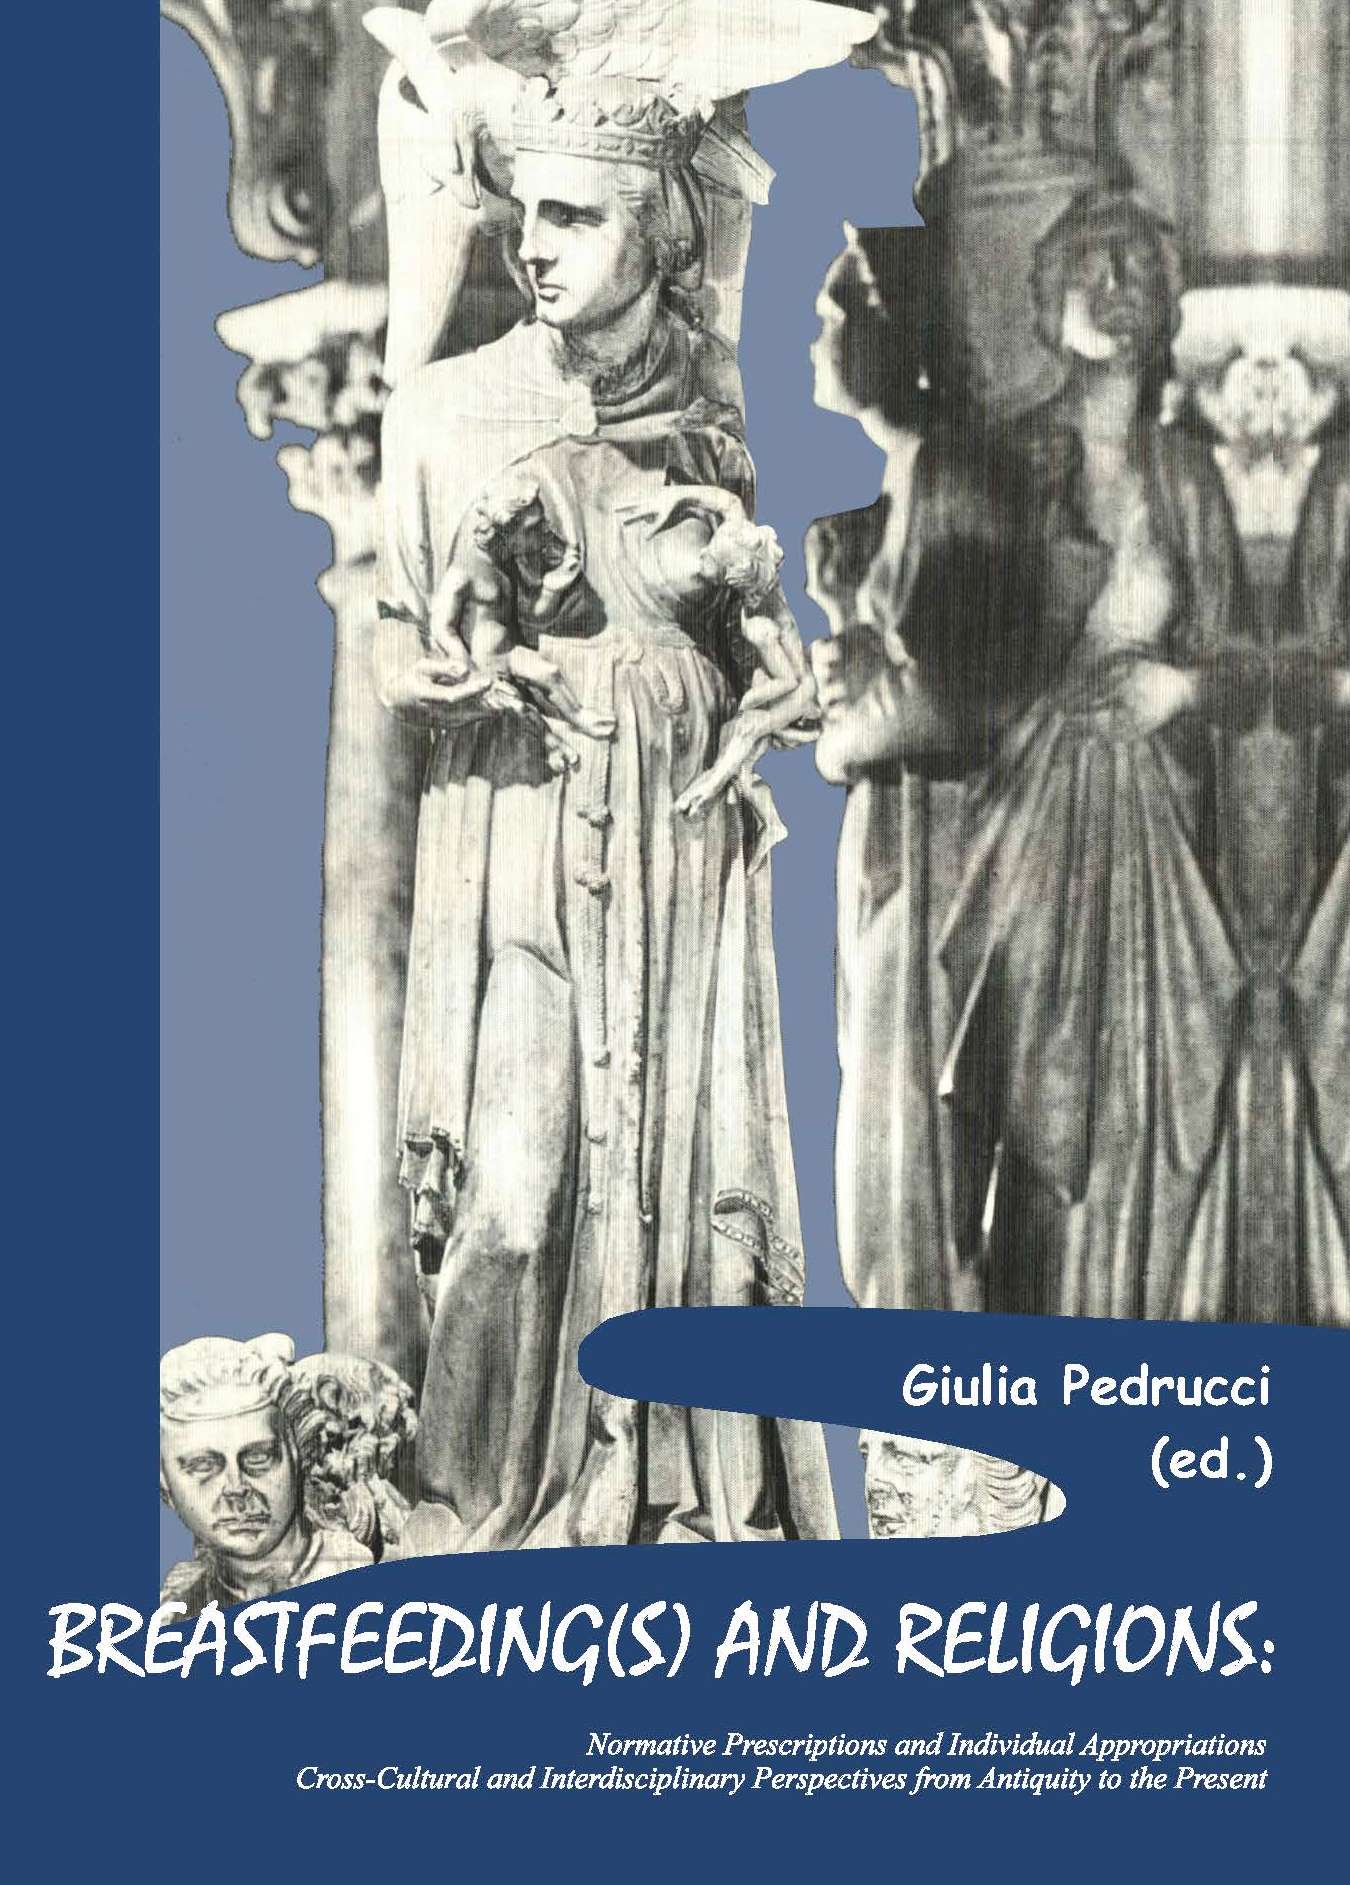 BREASTFEEDING(S) AND RELIGIONS:
Normative Prescriptions and Individual Appropriations. <br/>
Cross-Cultural and Interdisciplinary Perspectives from Antiquity 
to the Present - Sacra publica et privata 9
